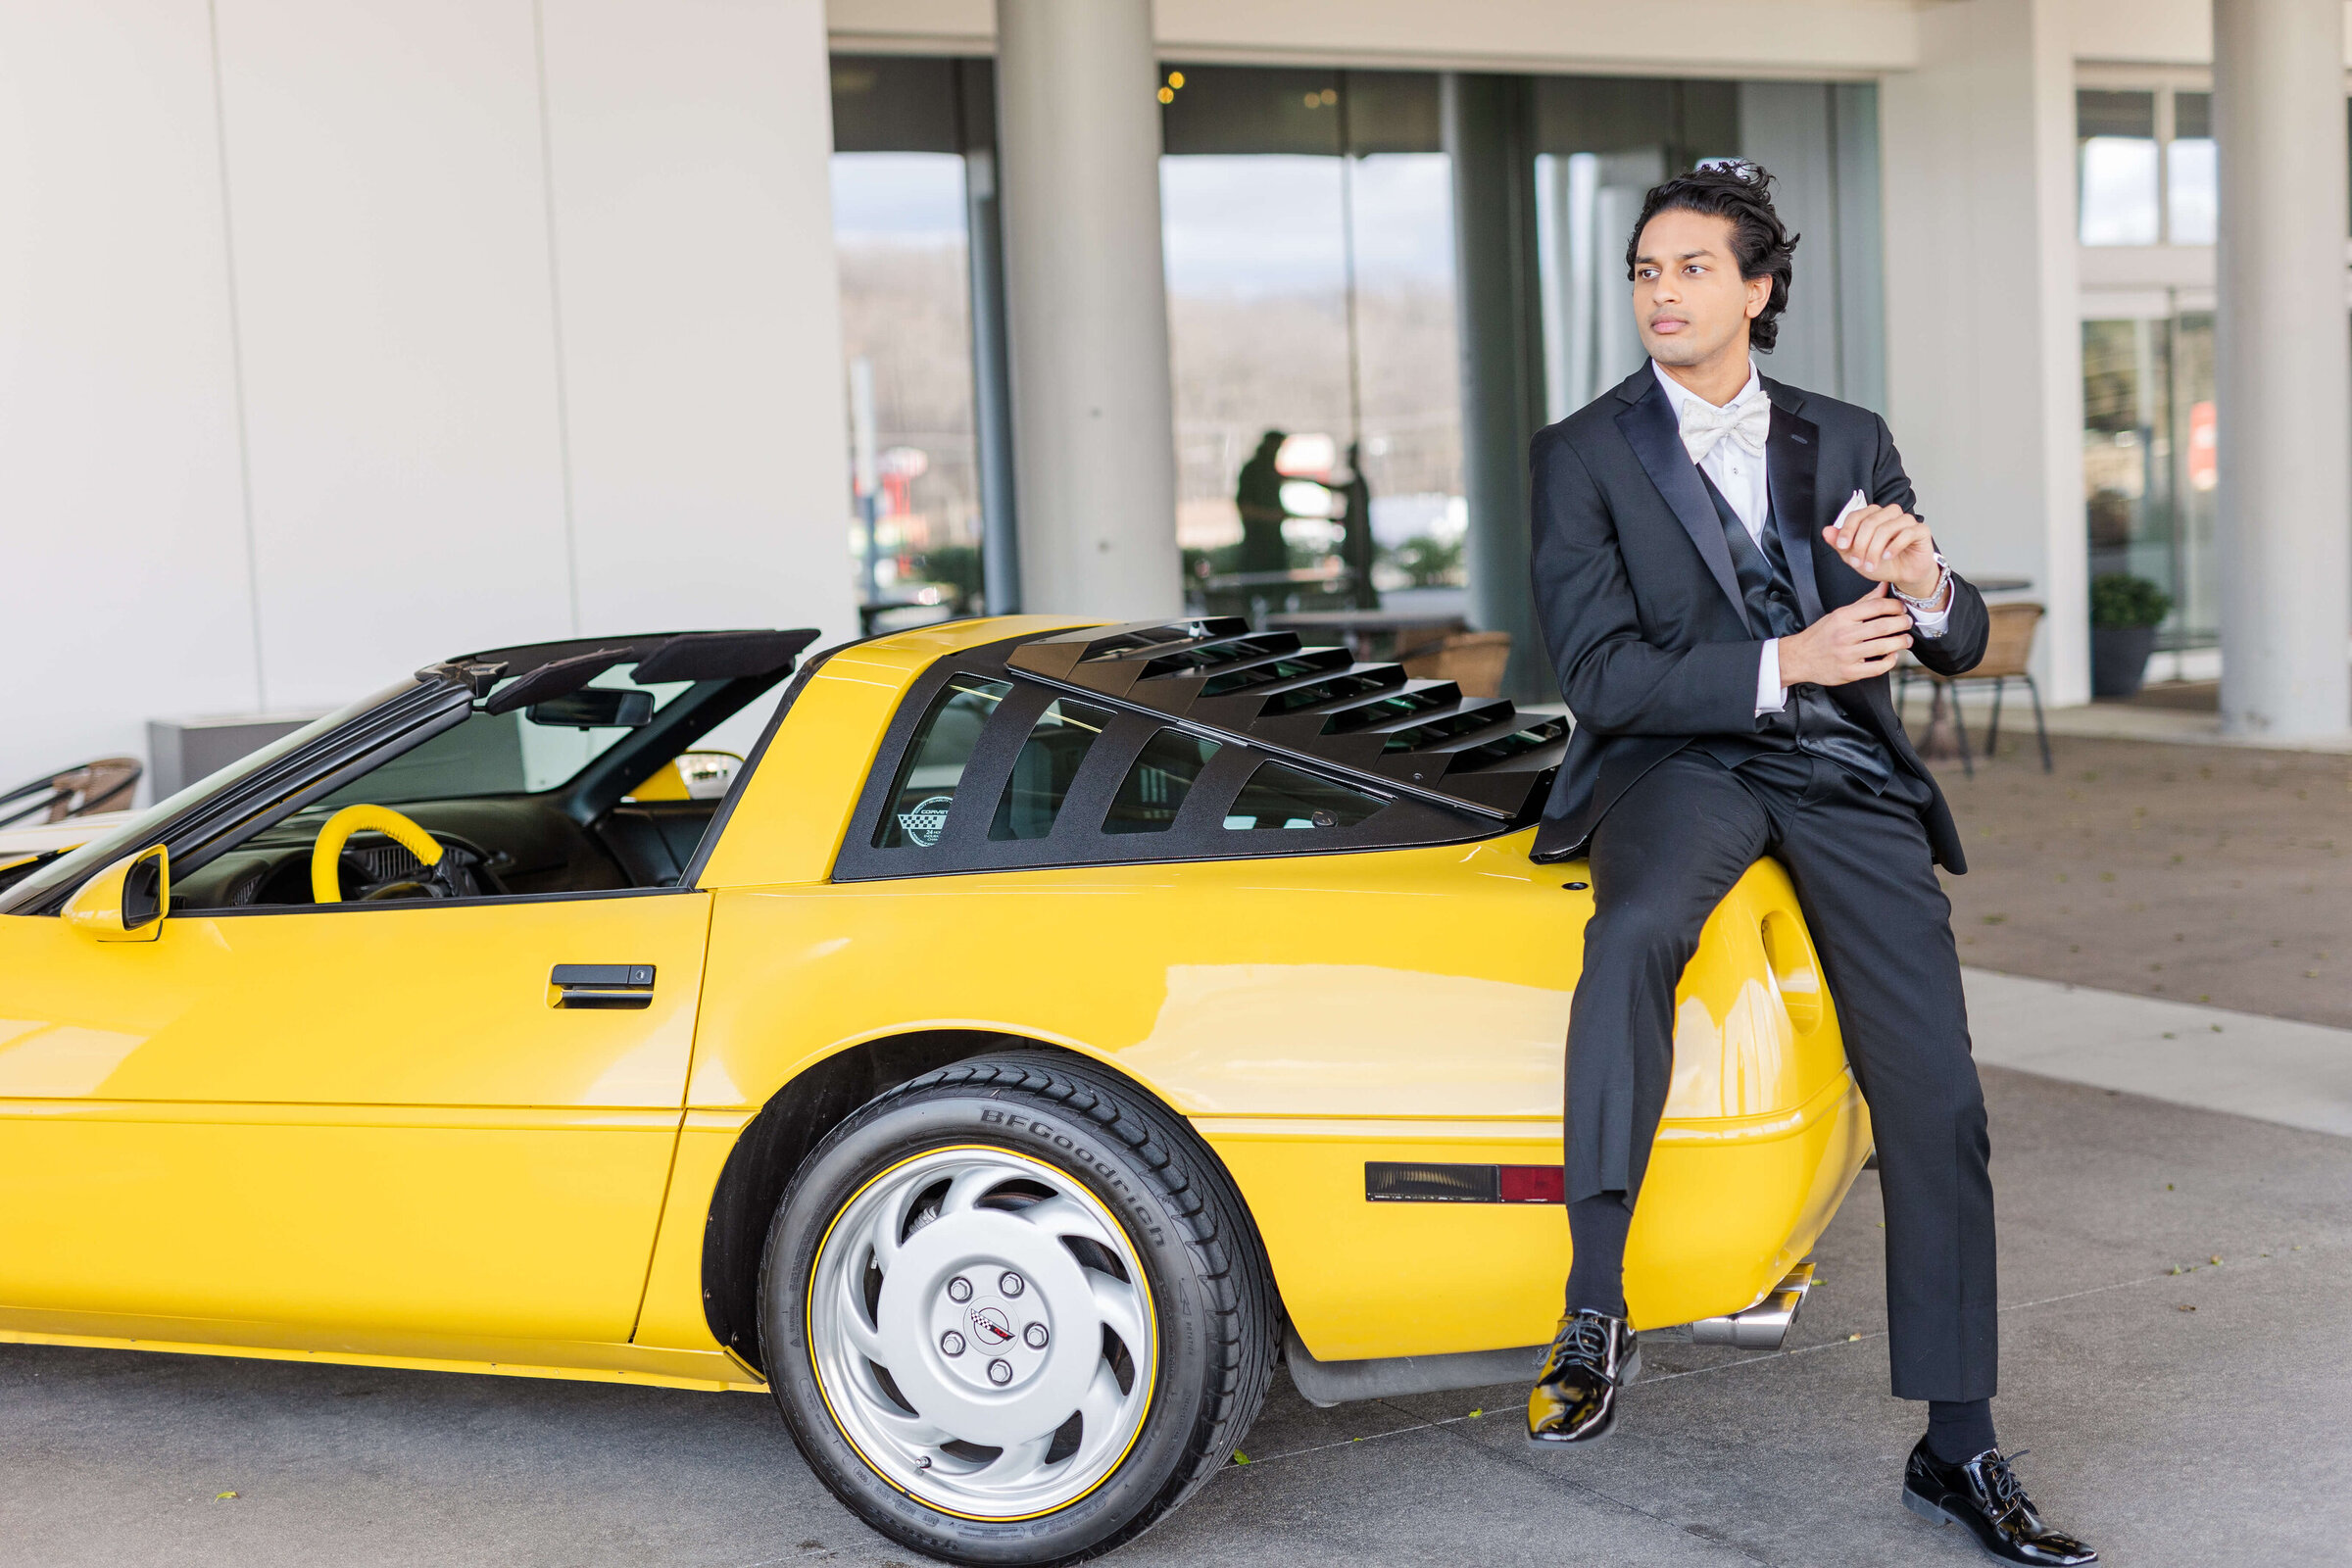 A groom sits on a yellow luxury car as he looks off into the distance